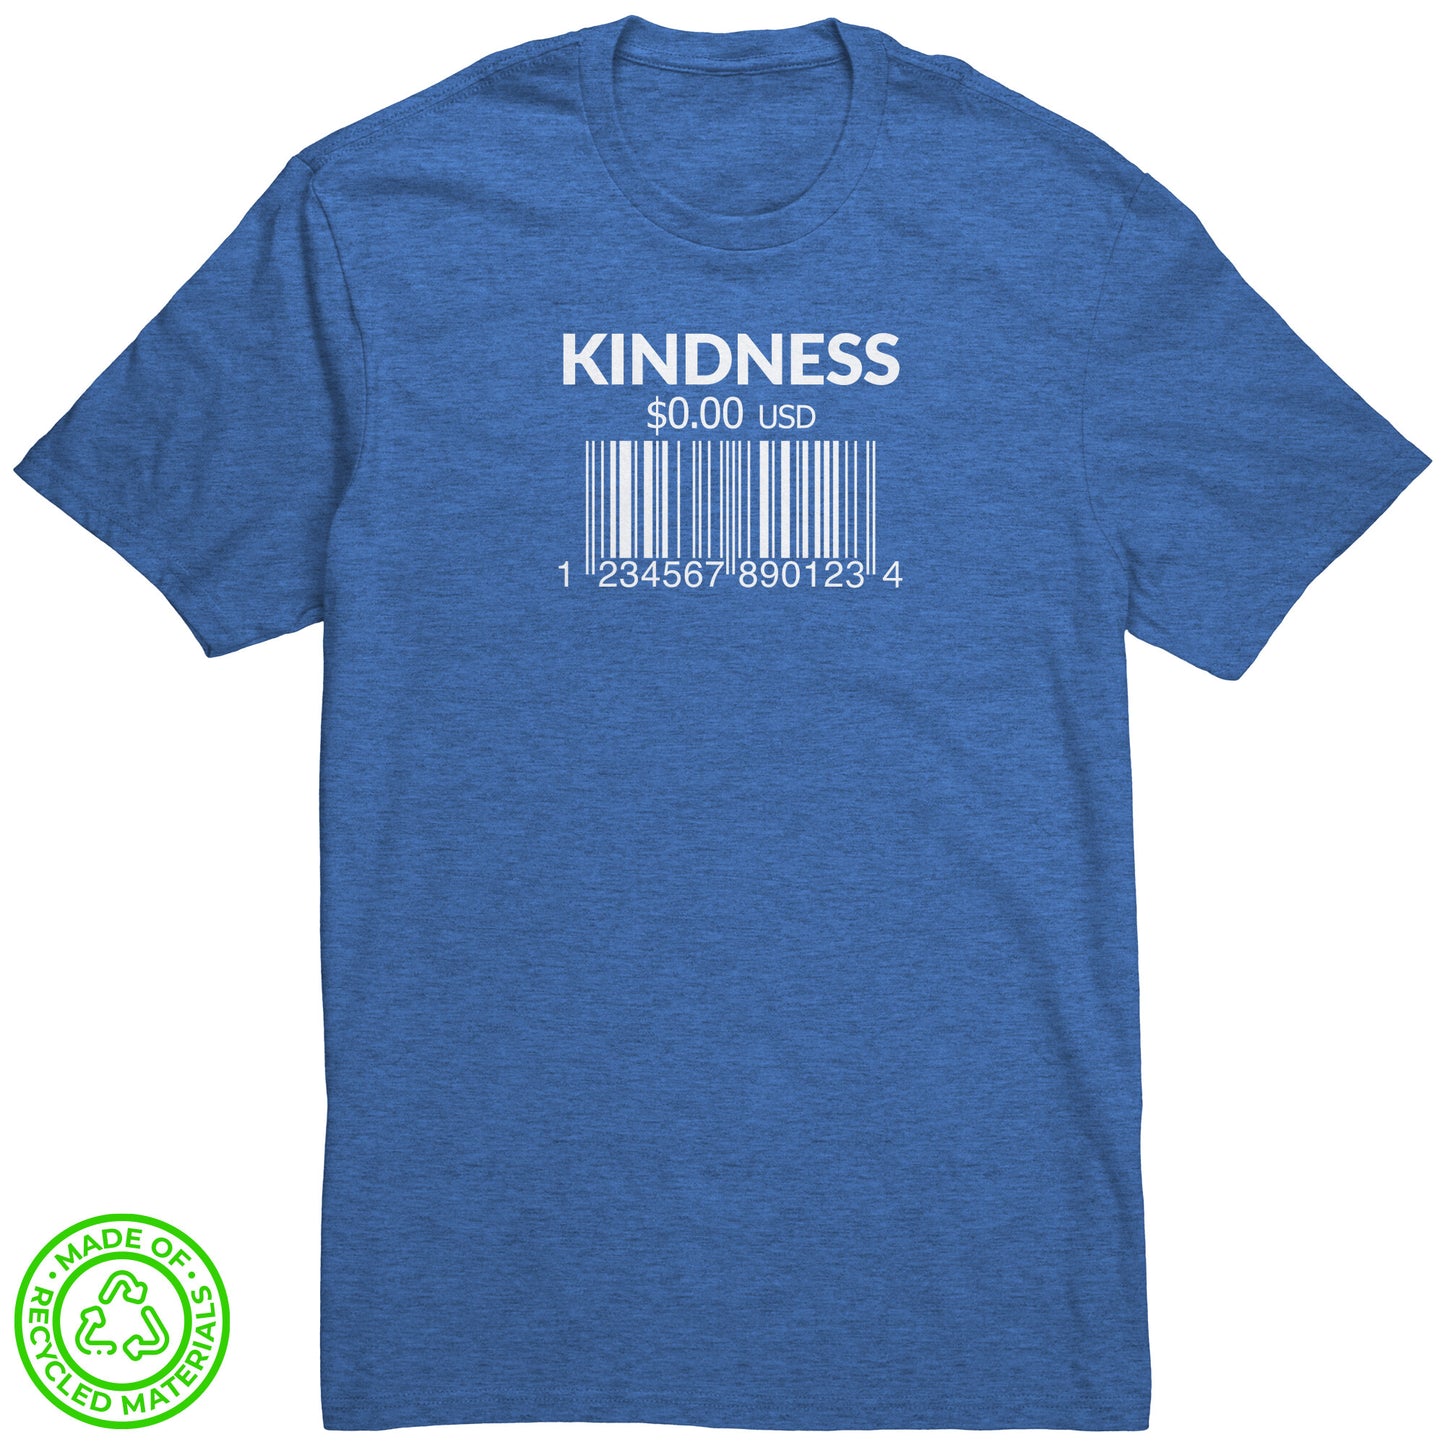 Kindness is Free Recycled Tee